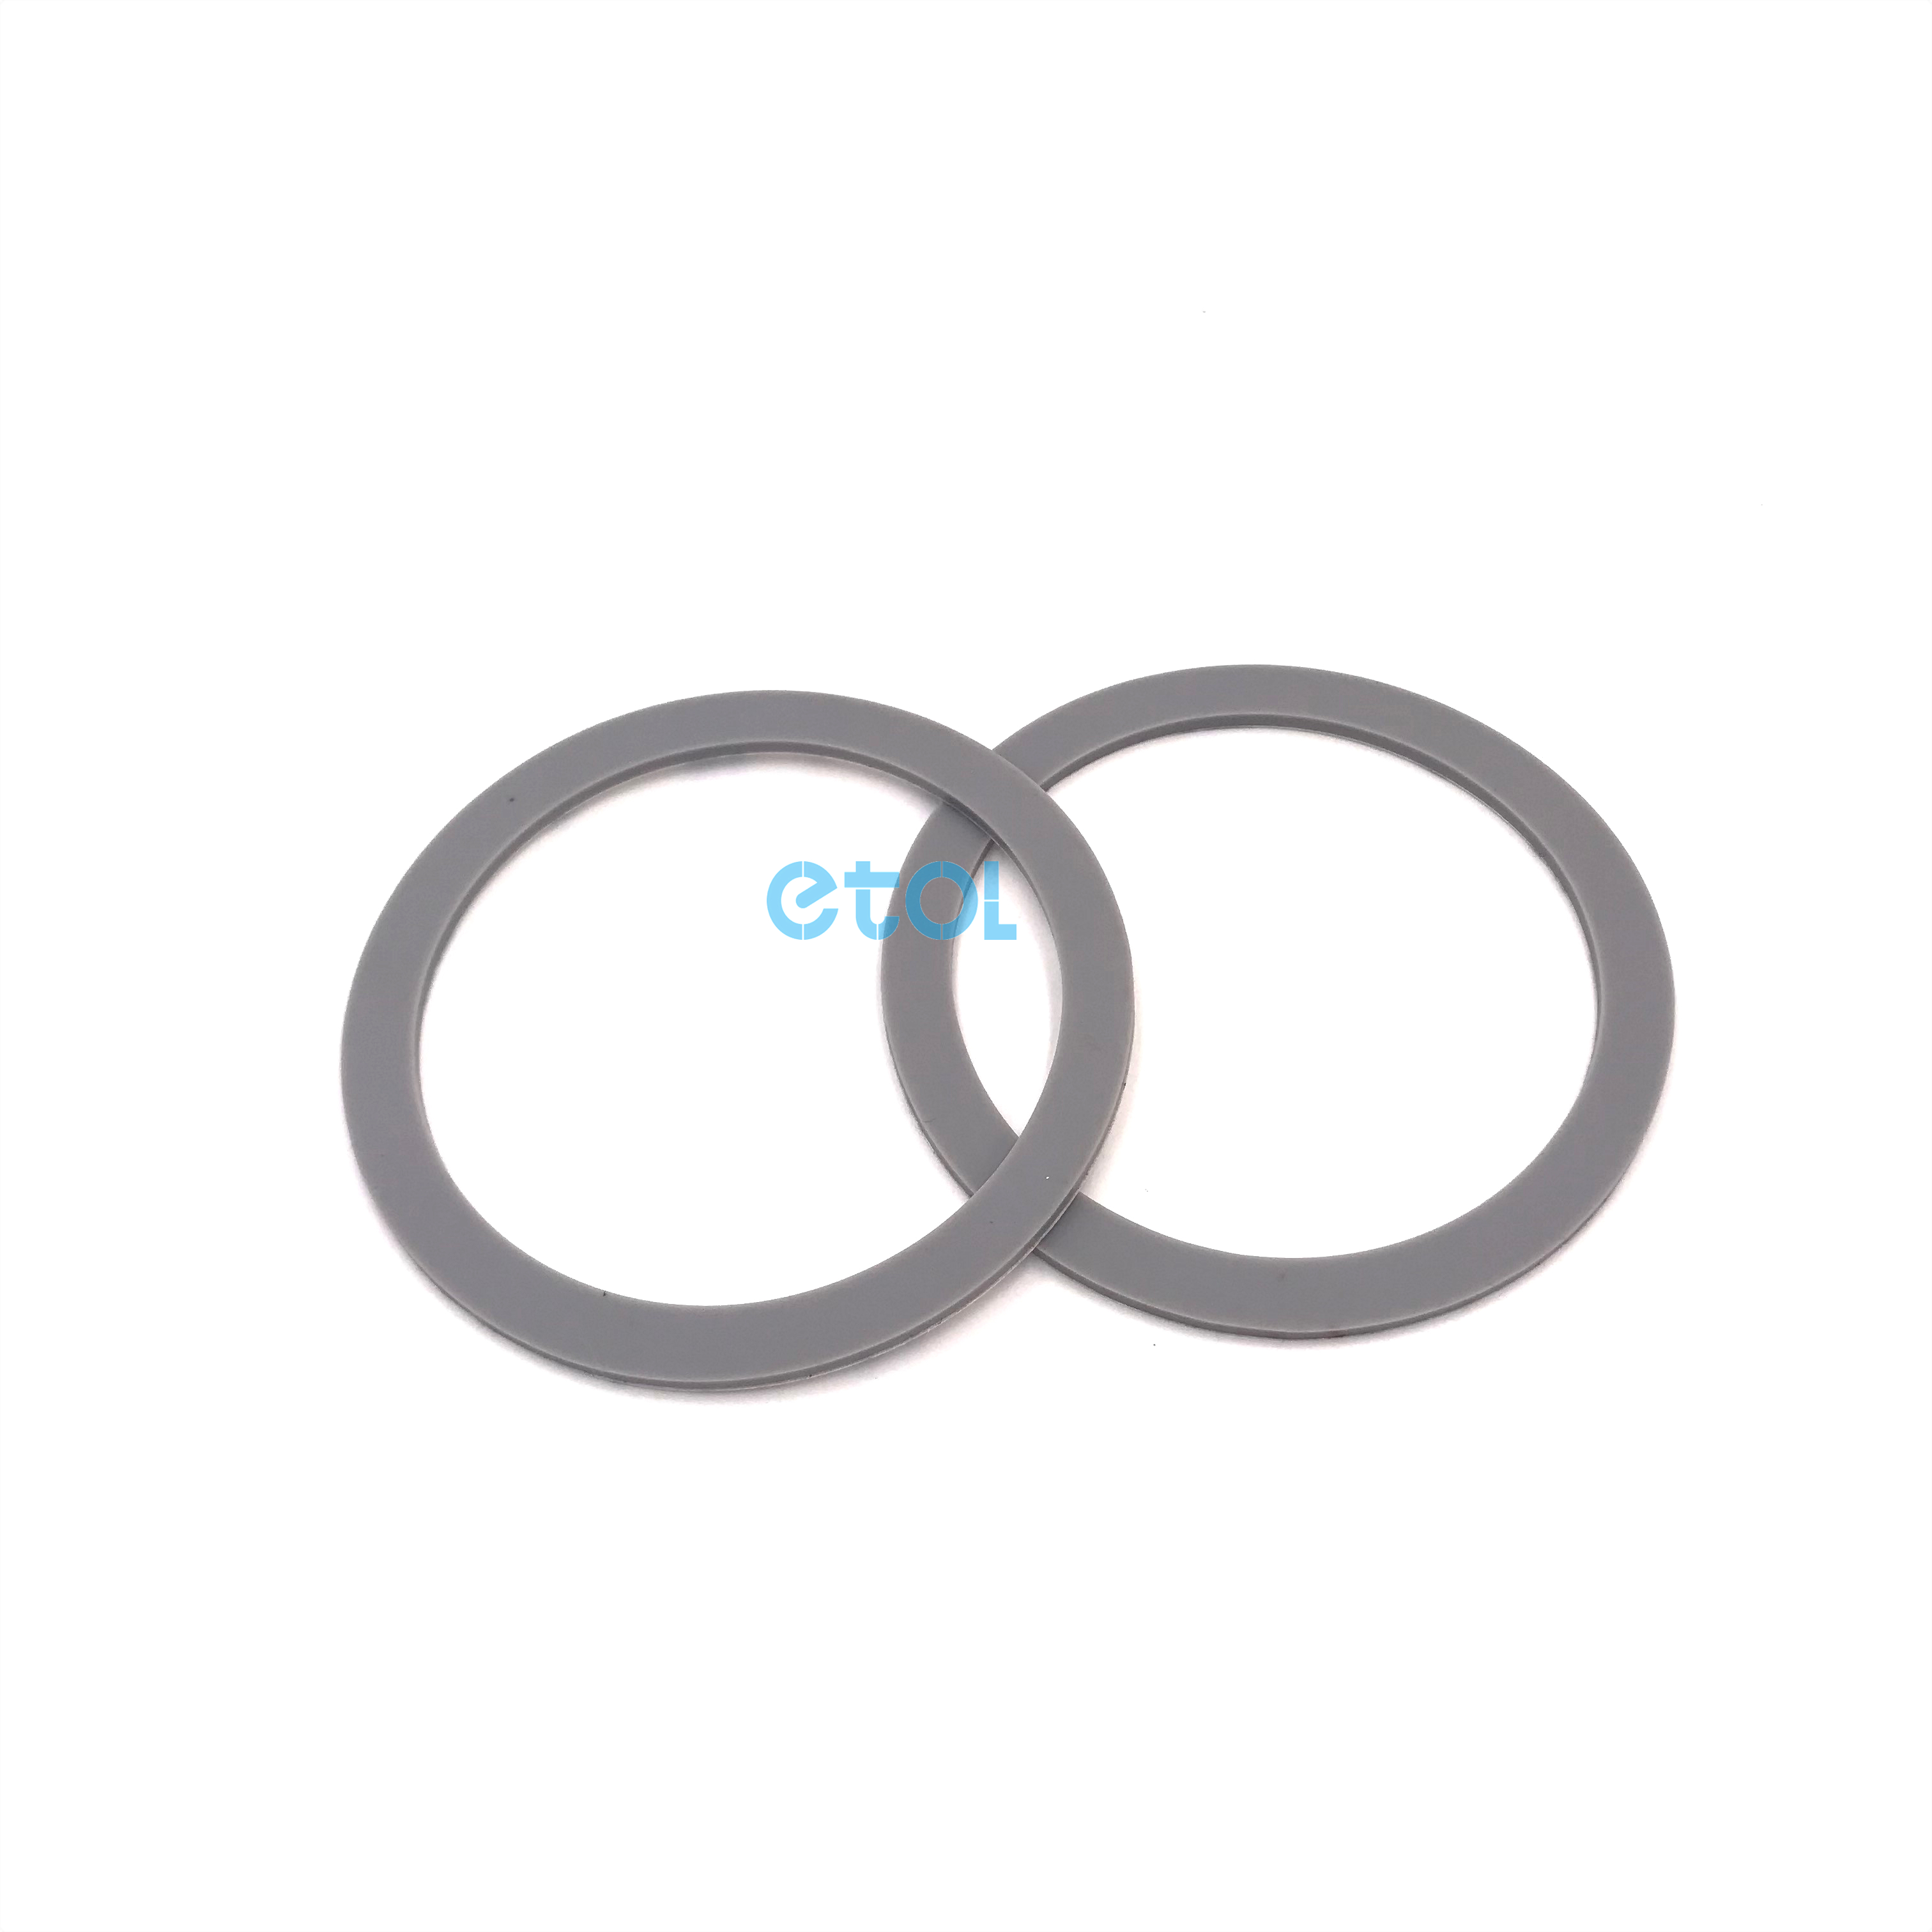 high temperature resistant silicone rings